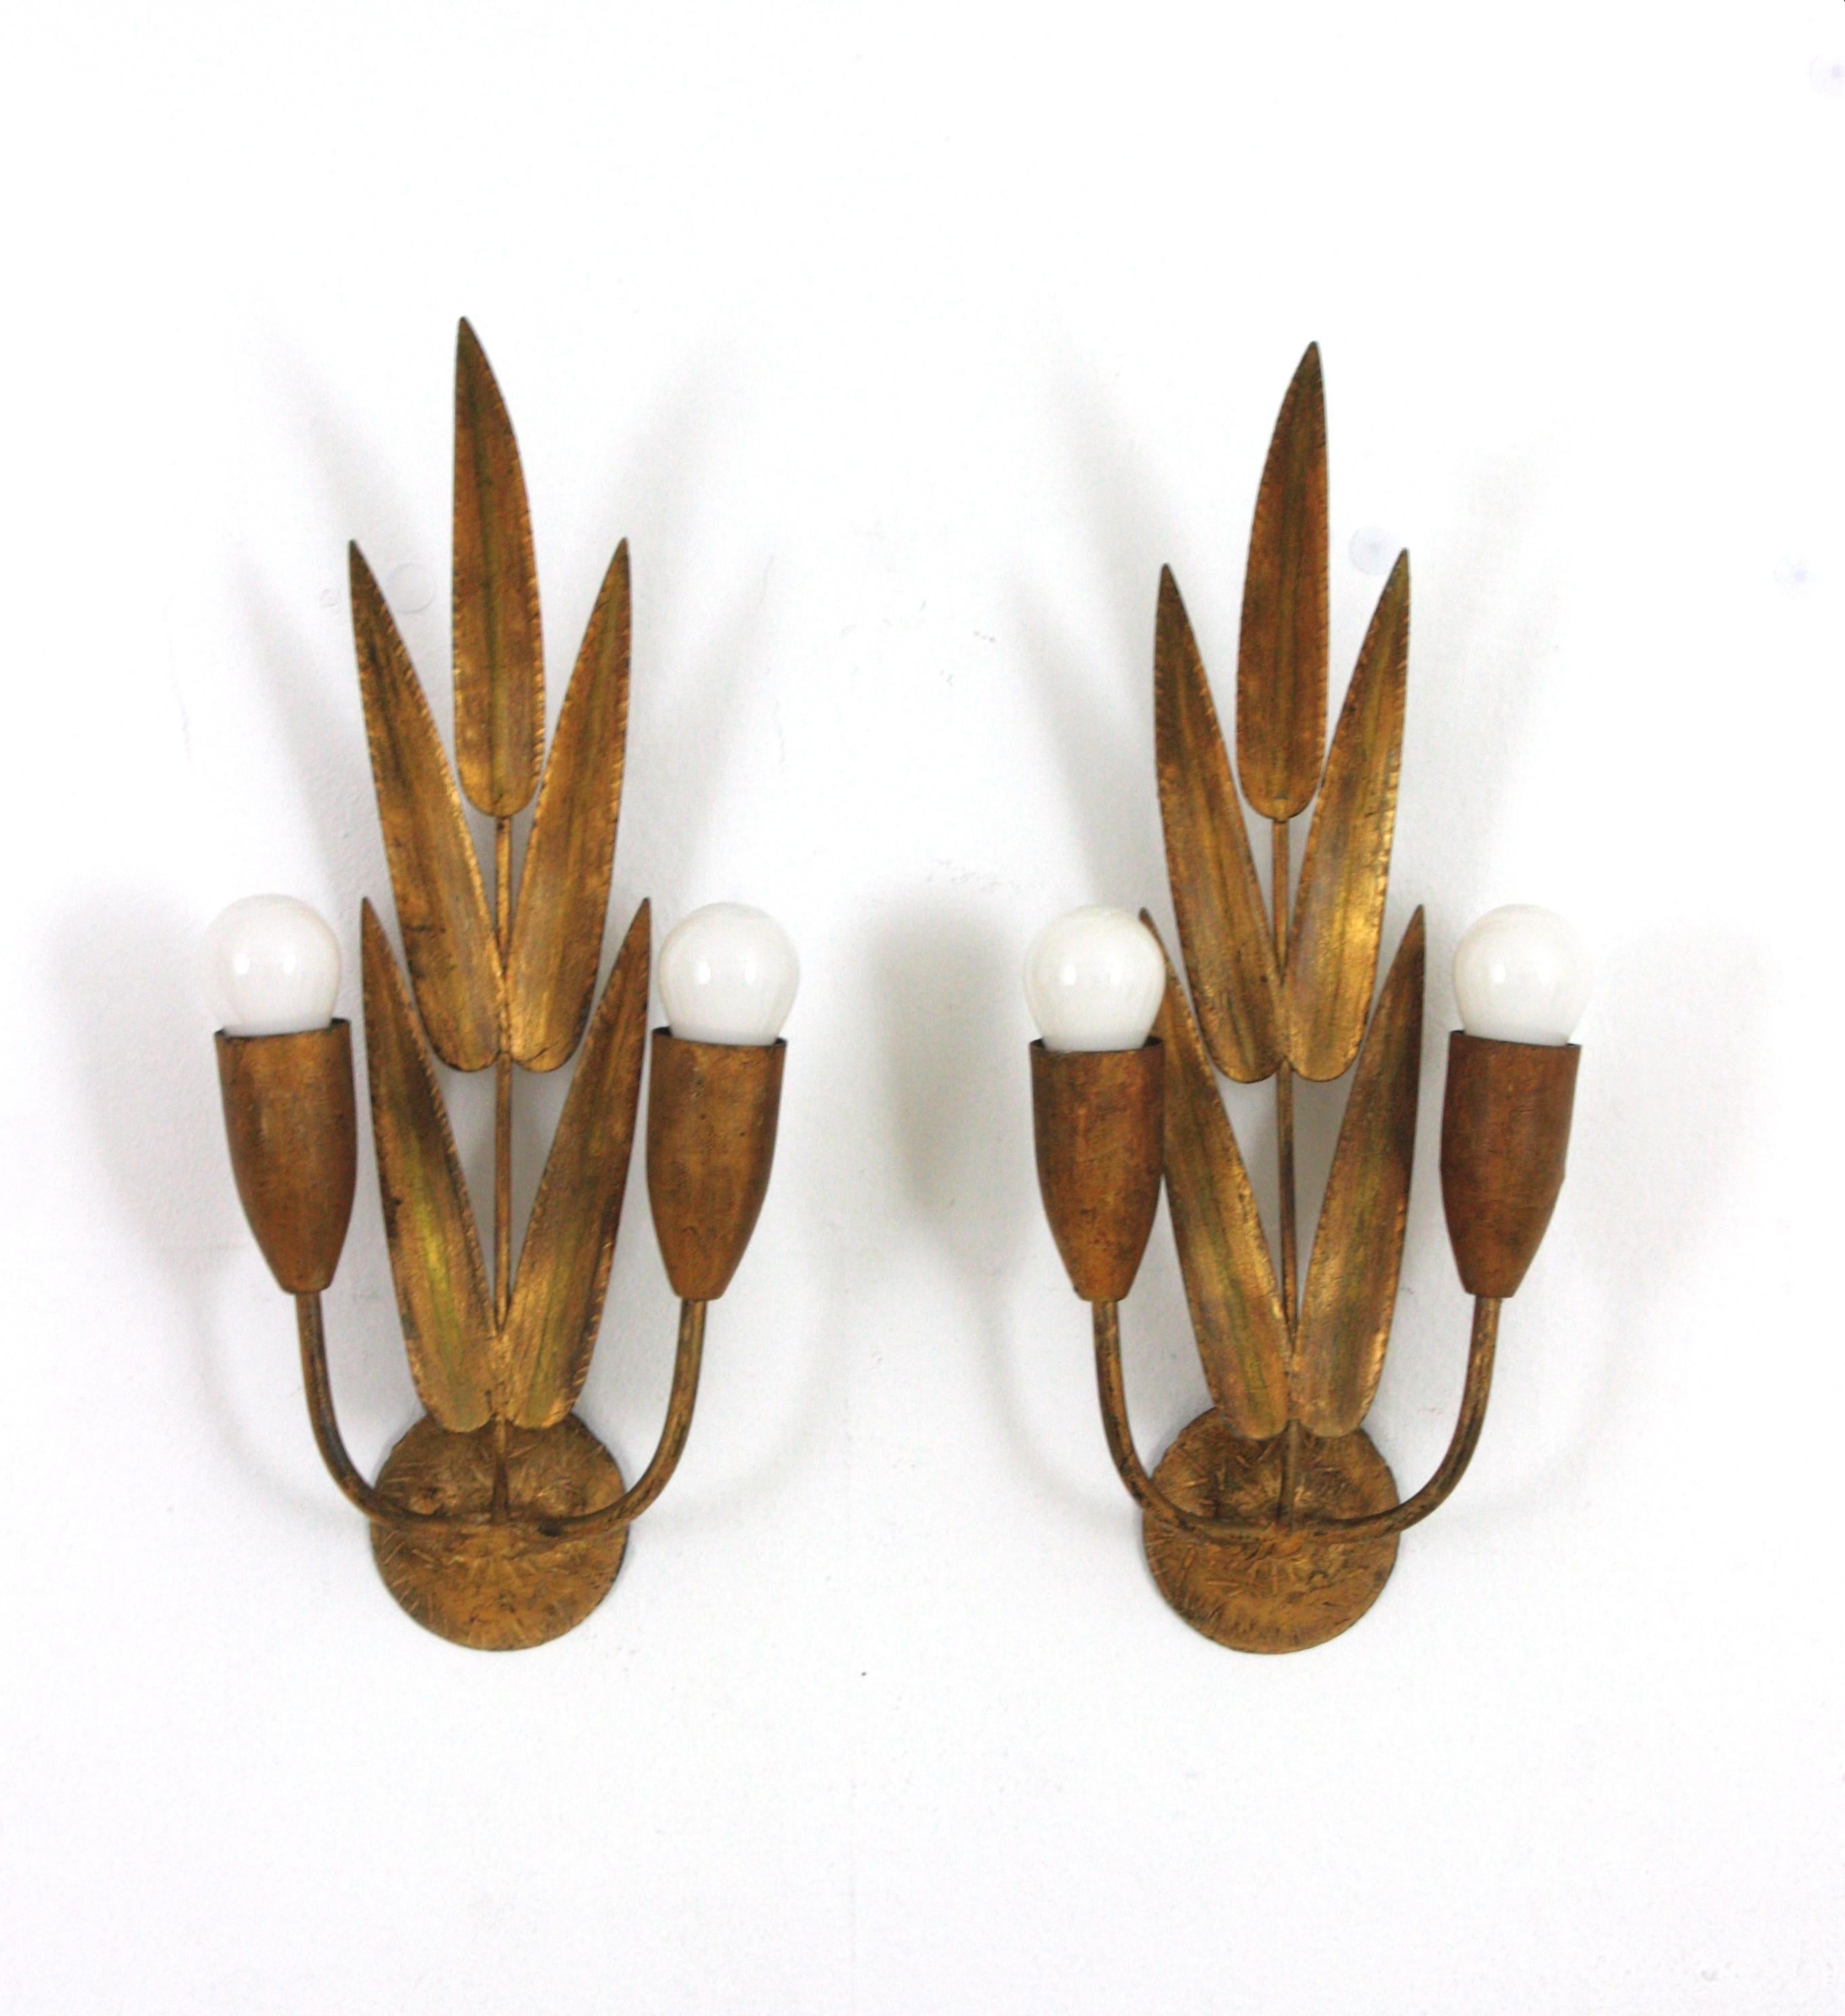 Hollywood Regency Pair of Spanish Wall Sconces with Foliage Design, Gilt Iron